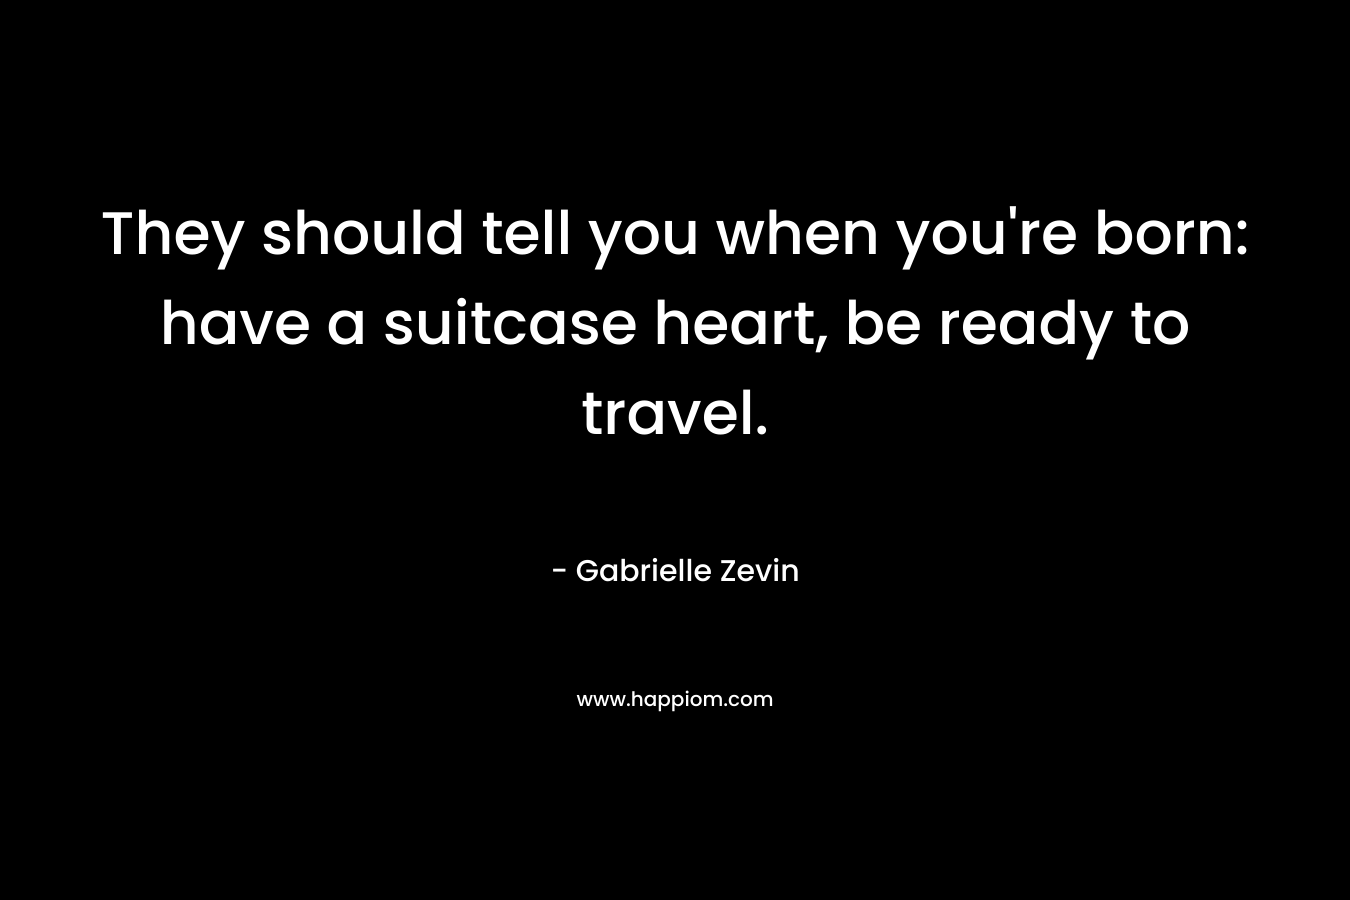 They should tell you when you're born: have a suitcase heart, be ready to travel.